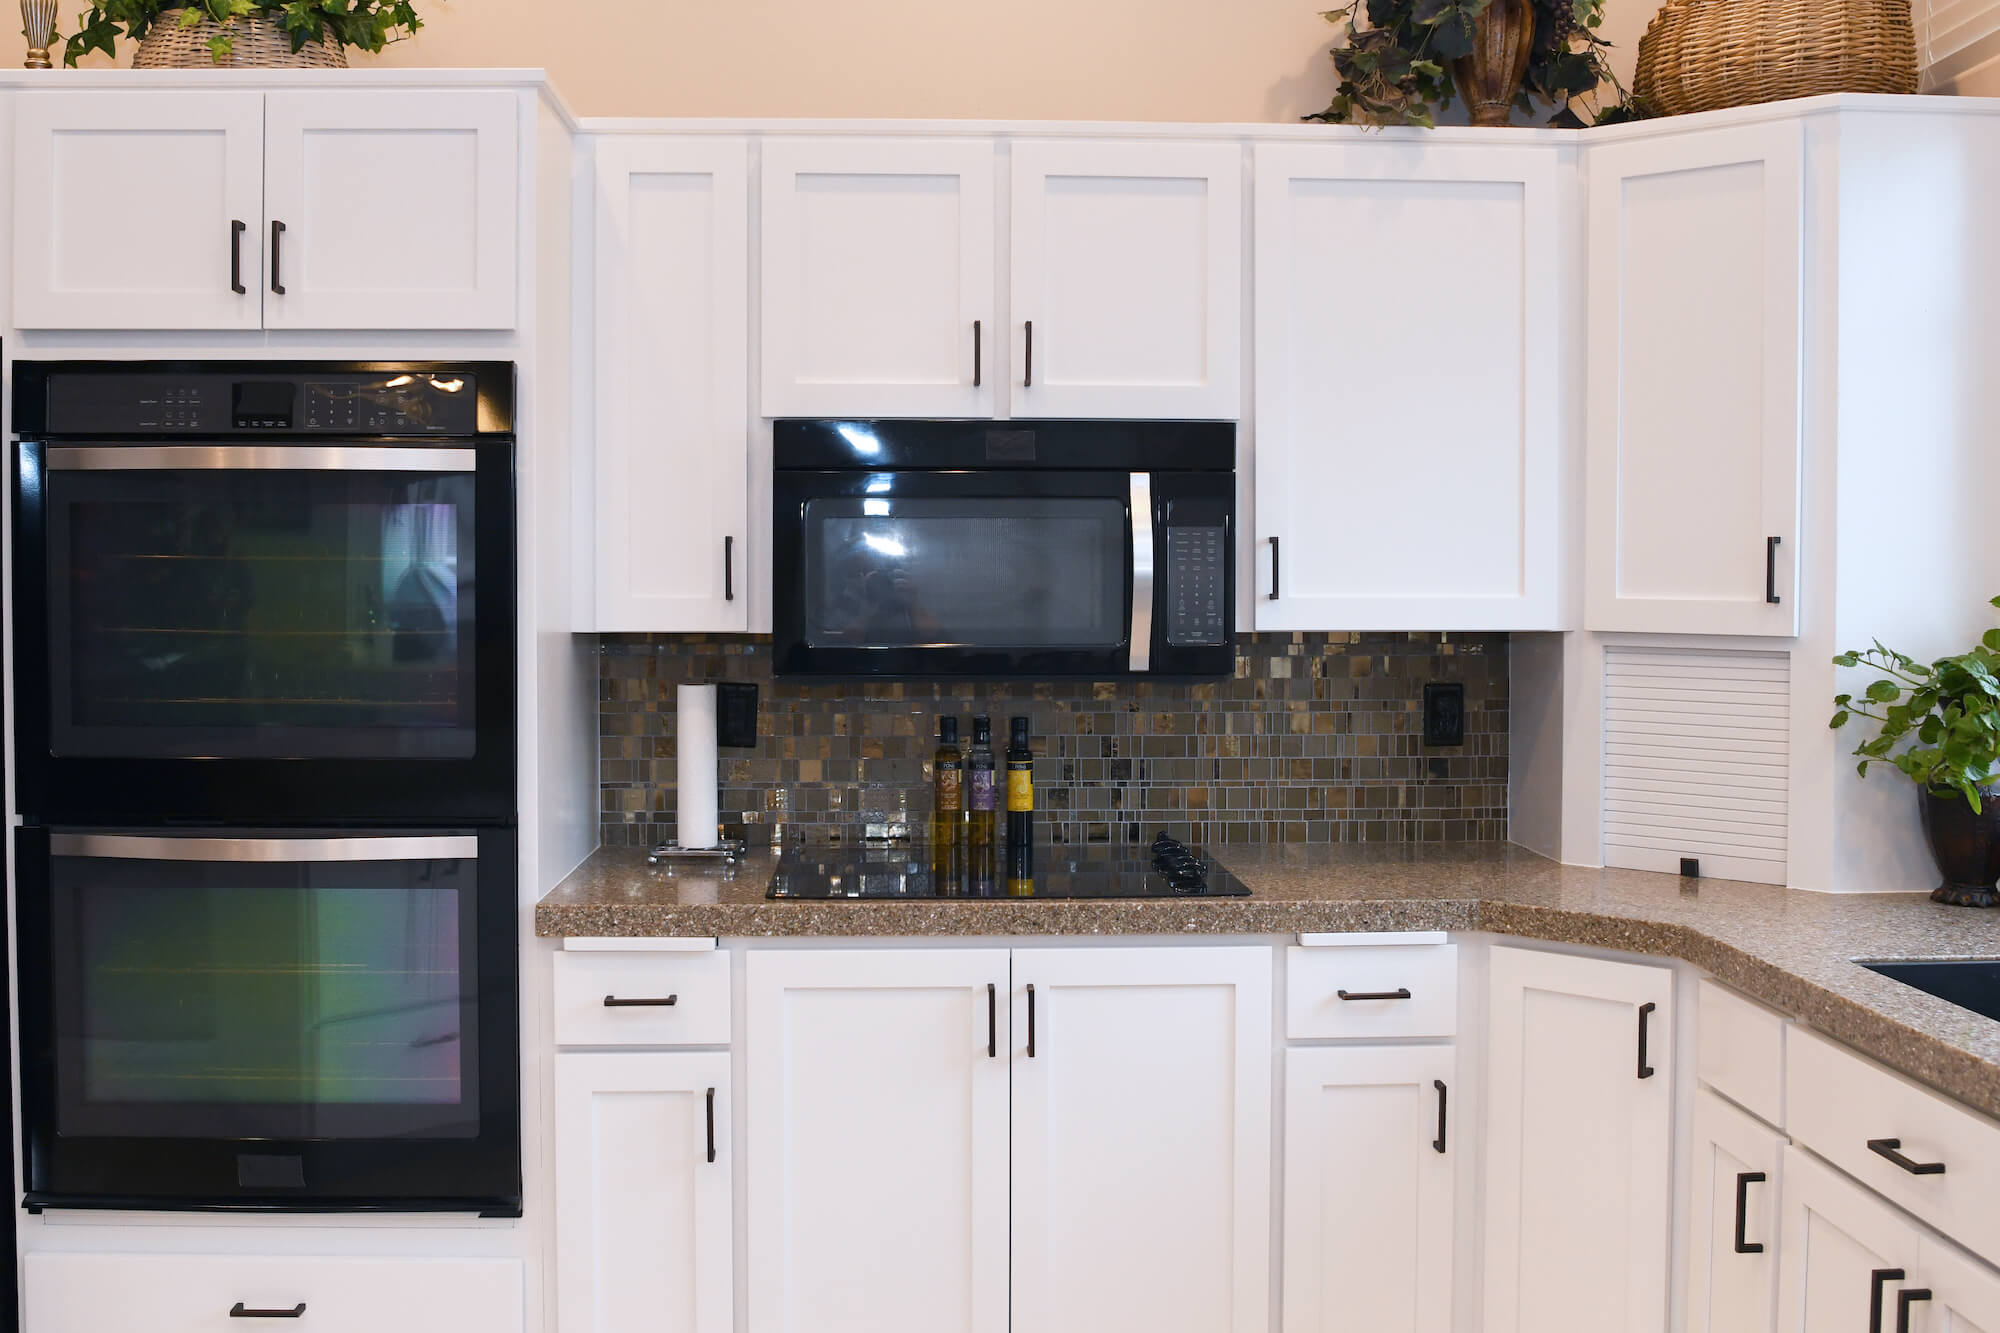 After-Outdated cabinets to white shaker style